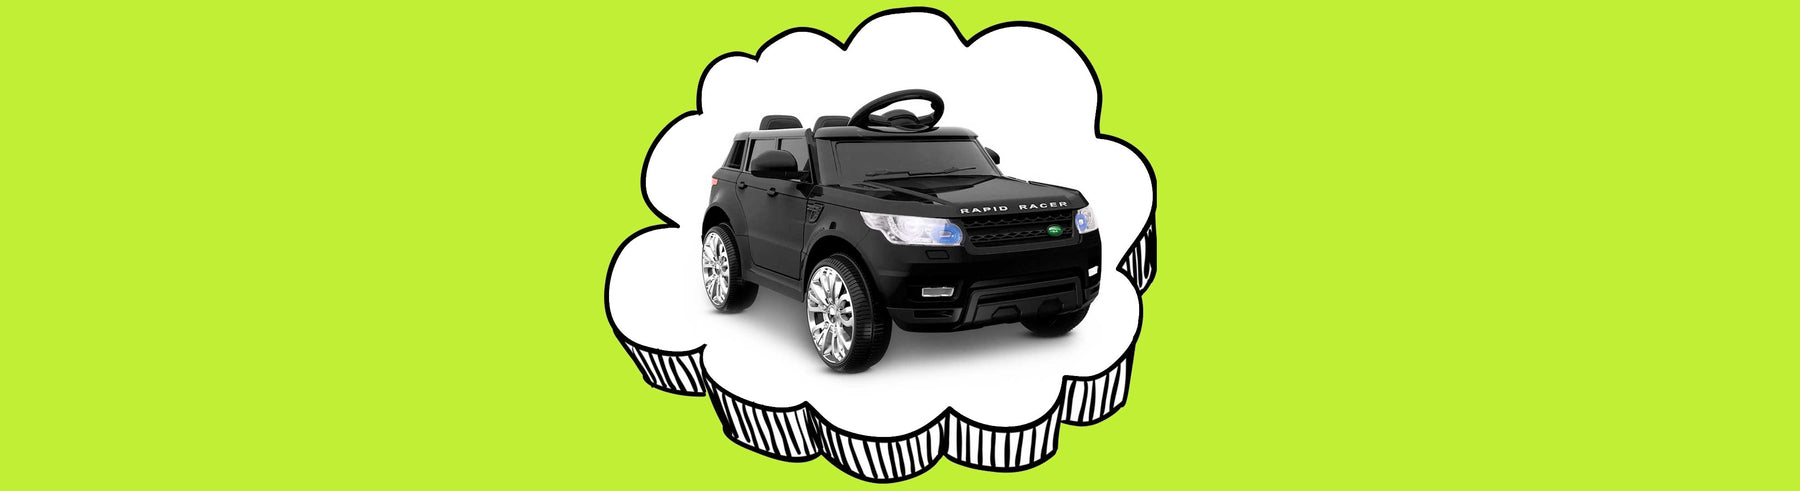 Range Rover Inspired Kids Ride On Car with Remote Control